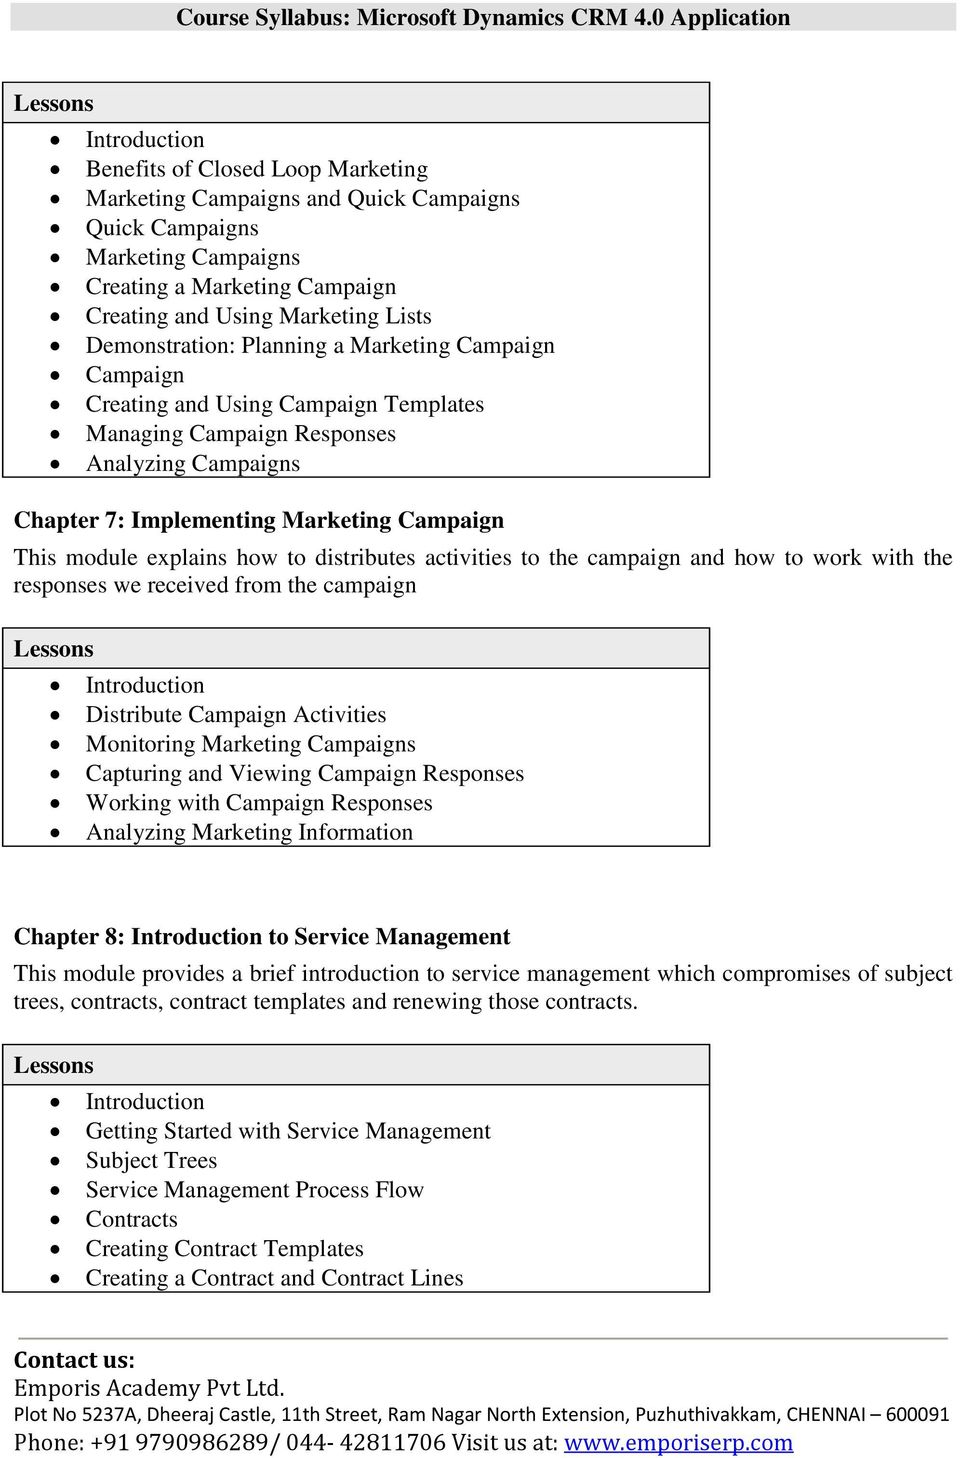 activities to the campaign and how to work with the responses we received from the campaign Distribute Campaign Activities Monitoring Marketing Campaigns Capturing and Viewing Campaign Responses